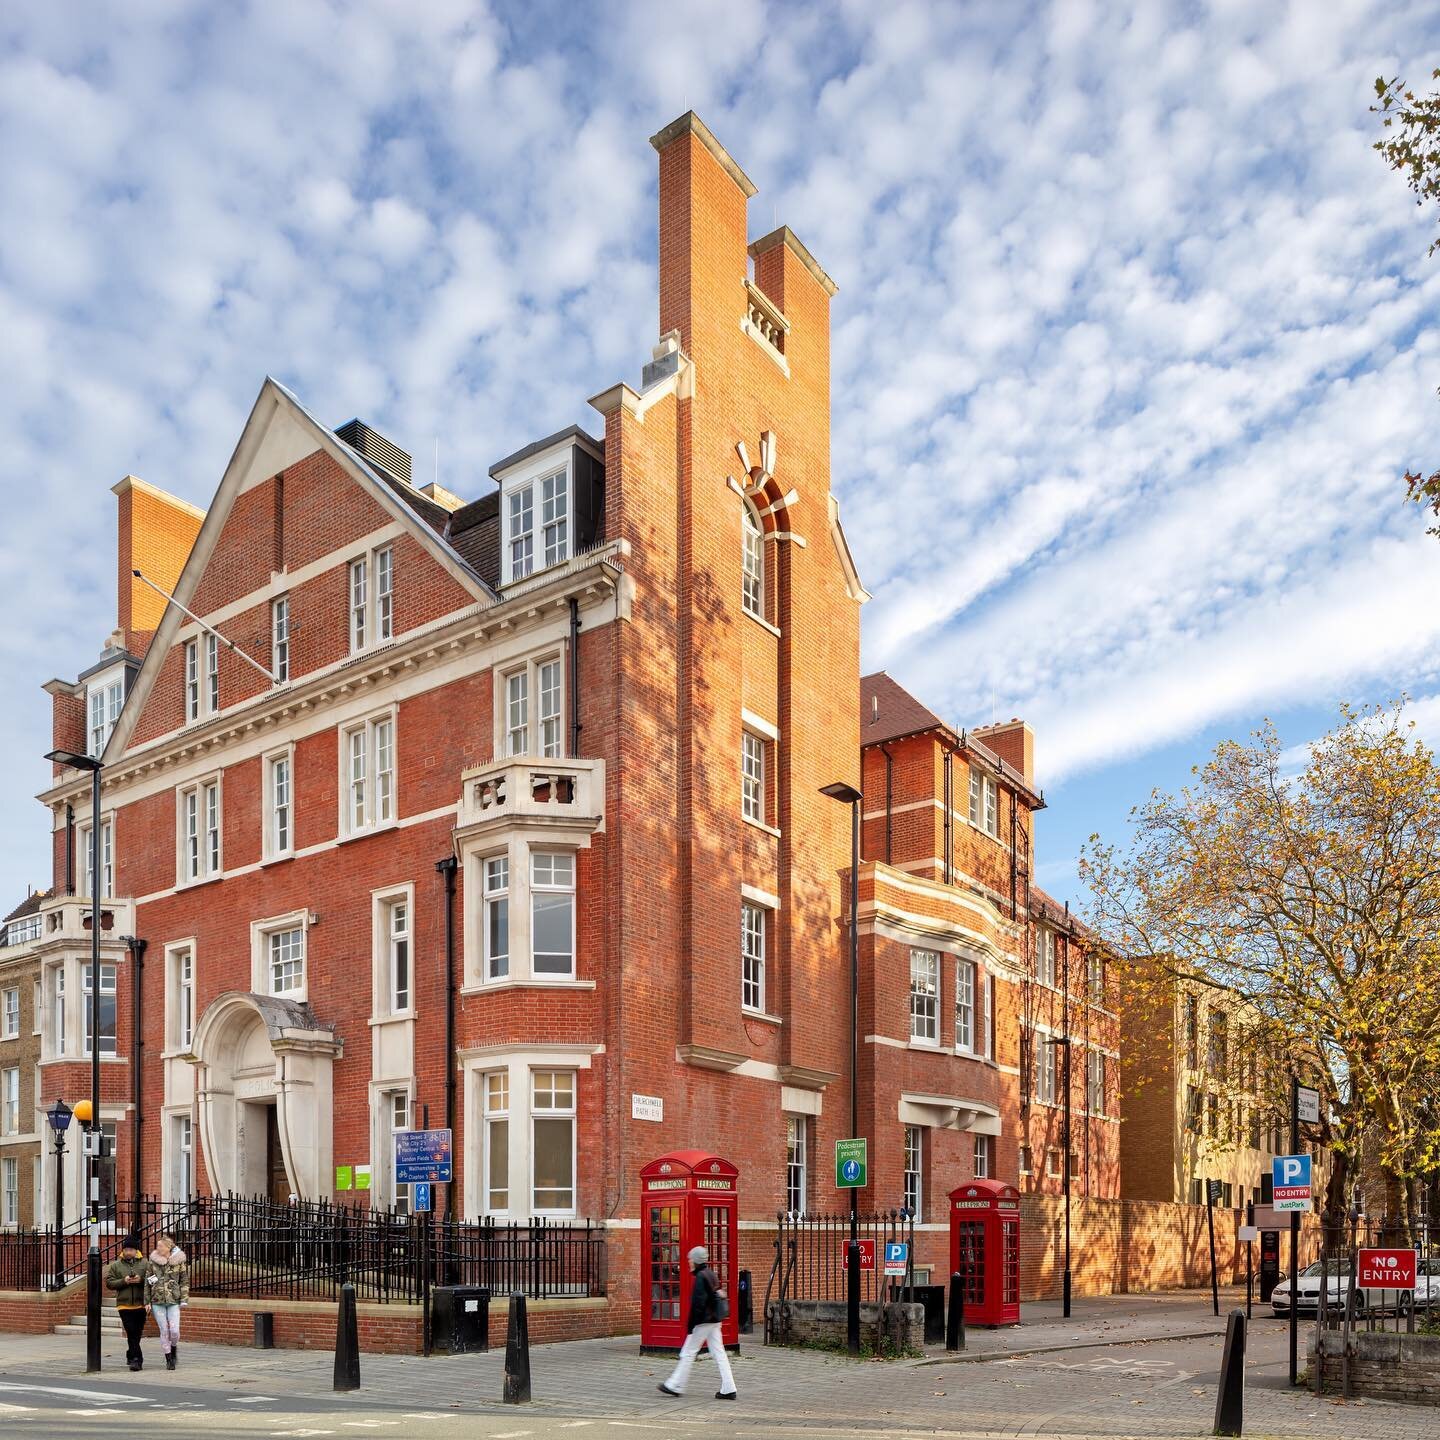 Leadenhall&rsquo;s Grade II refurbishment of the former Hackney police station for the Department for Education is now complete. #education #listedbuildings #heritageengland #schooldesign #ahrarchitects